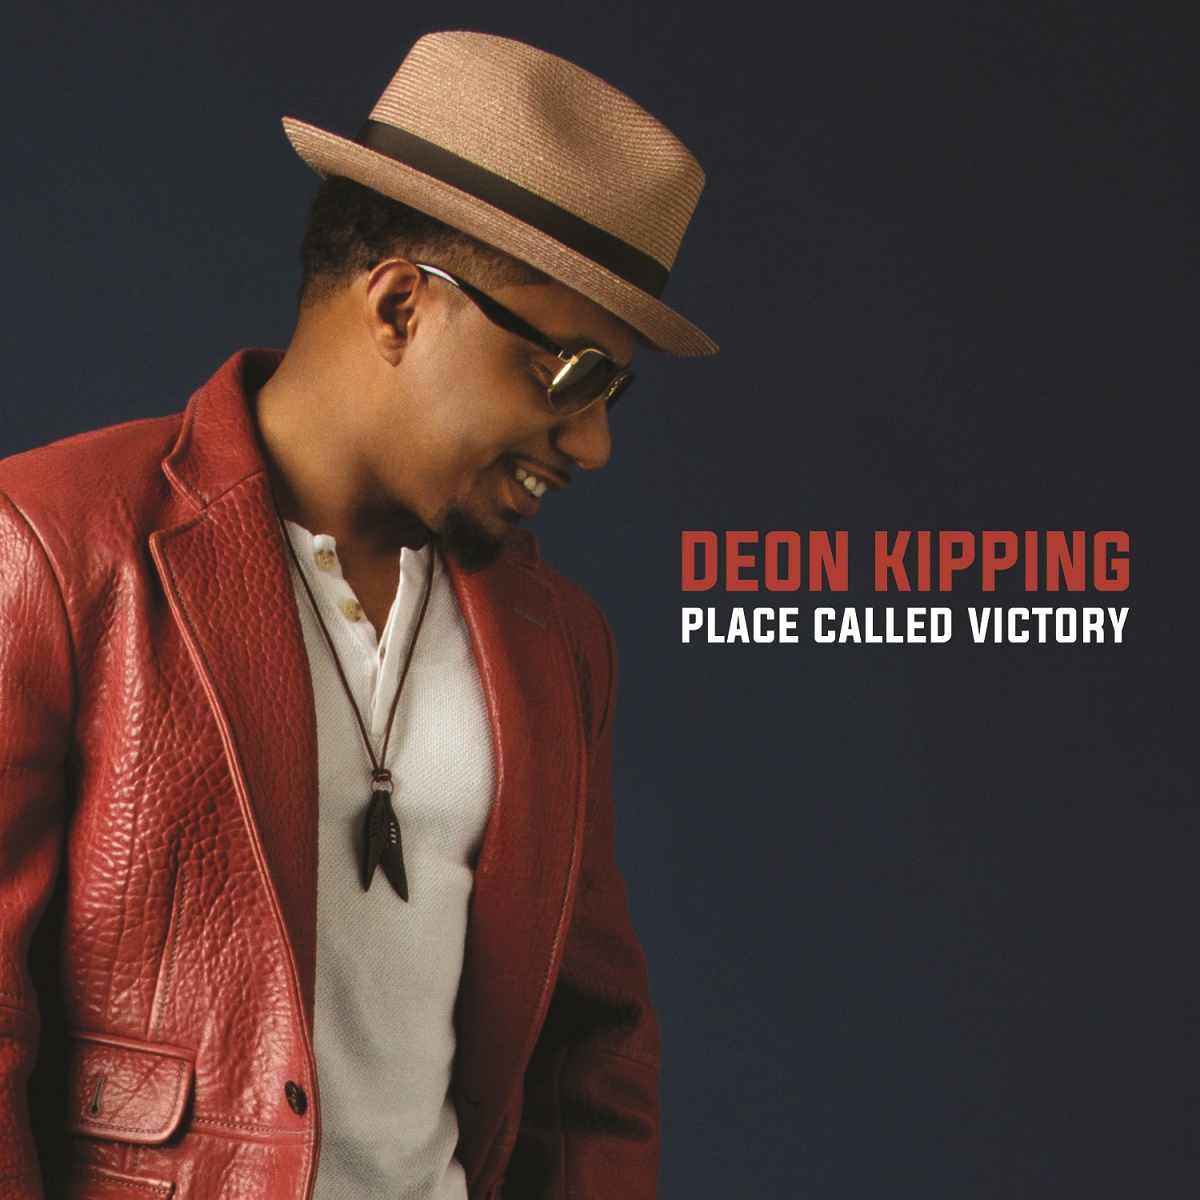 Deon kipping - Place called Victory